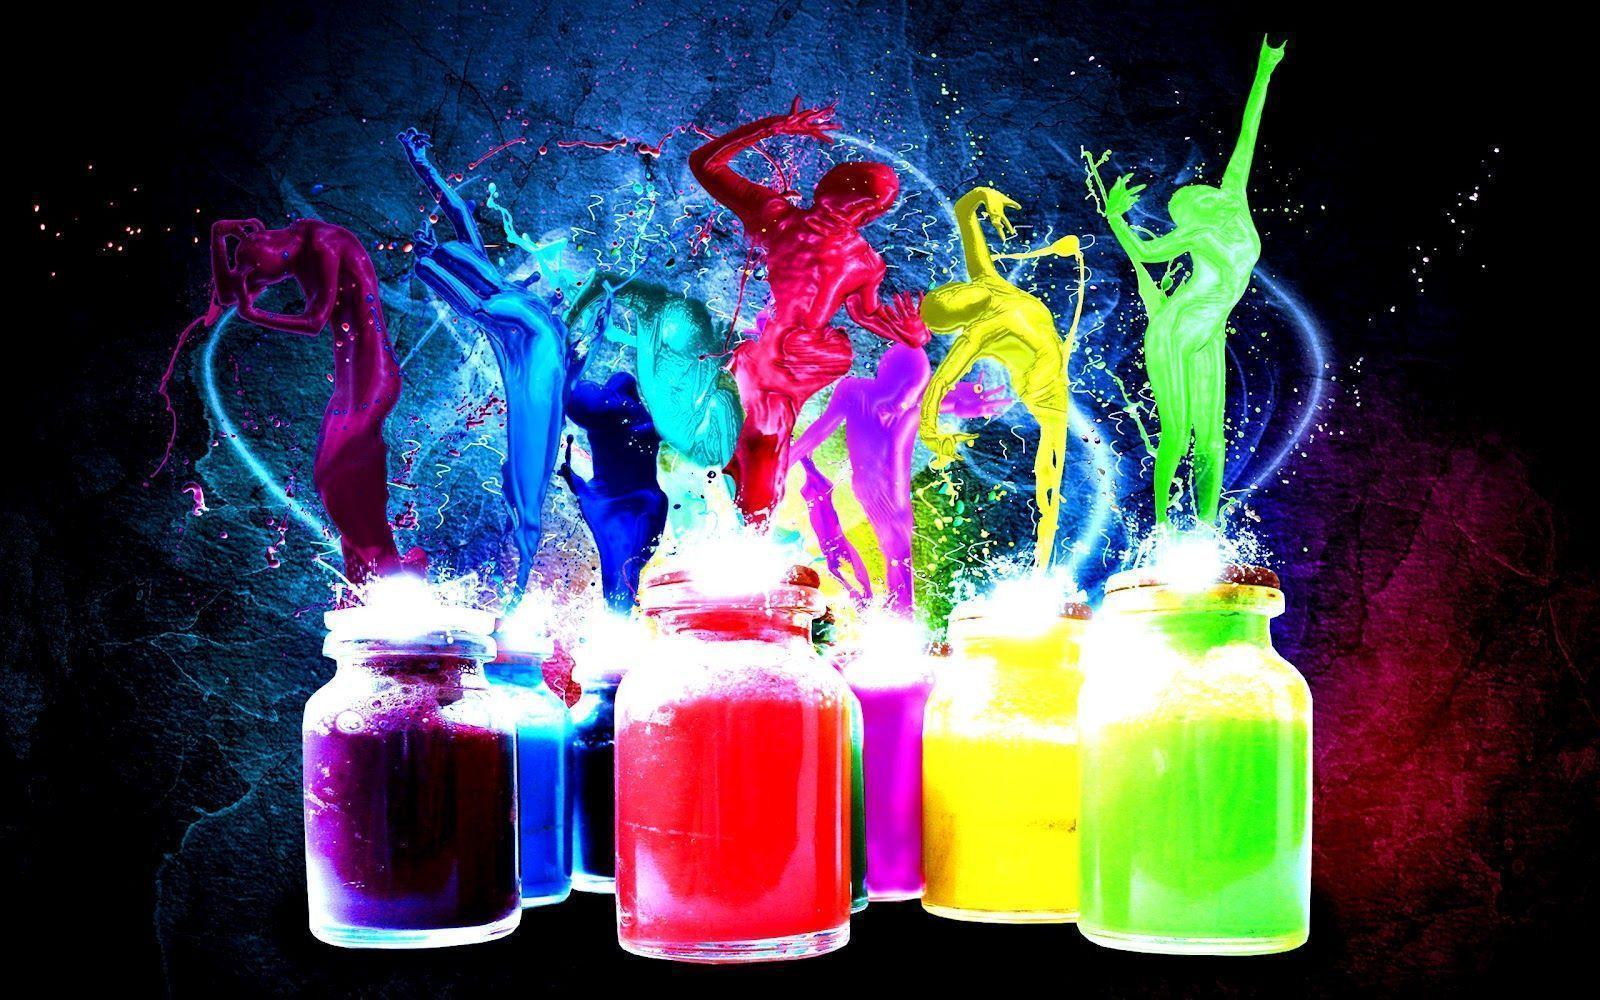 Wallpaper: Bright Colored Paints